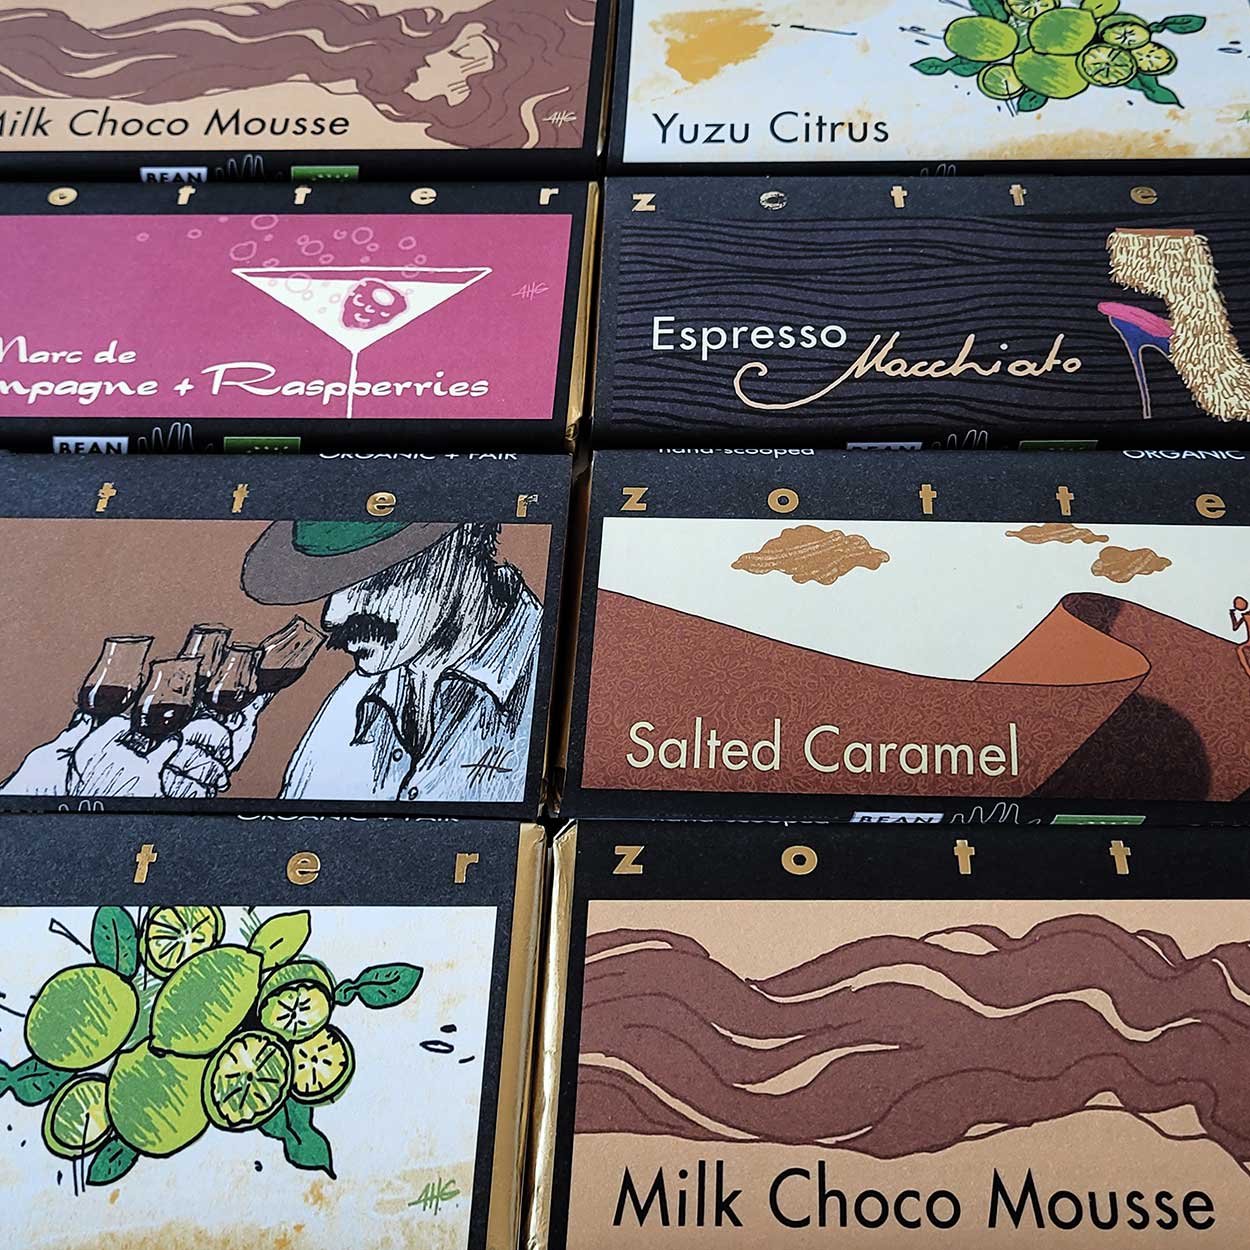 Austrian chocolate bars by Zotter in Ontario Canada